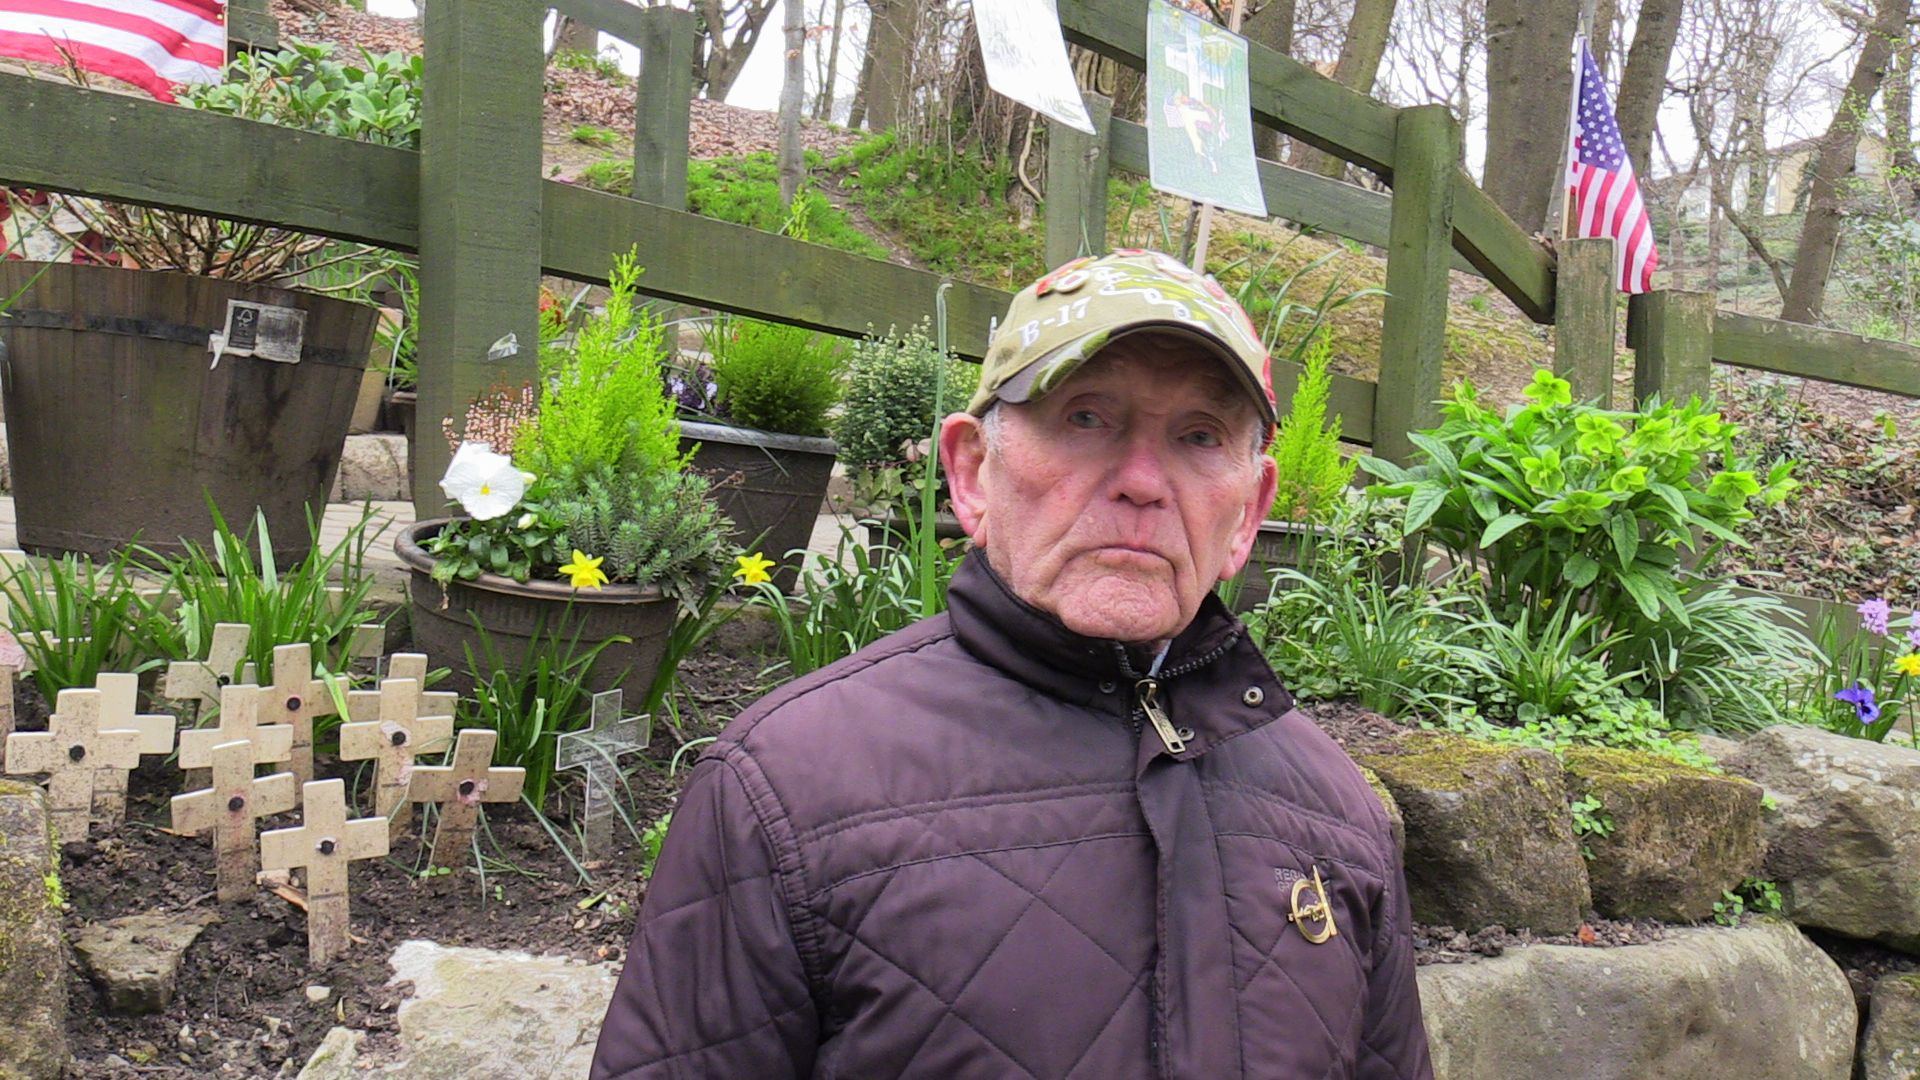 Pensioner Tony Foulds beside the war memorial to the victims of the B-17 Flying Fortress, which crashed in Endcliffe Park, Sheffield, on February 22 1944. The war memorial, tended to by Mr Foulds, has been vandalised after revellers descended on a park